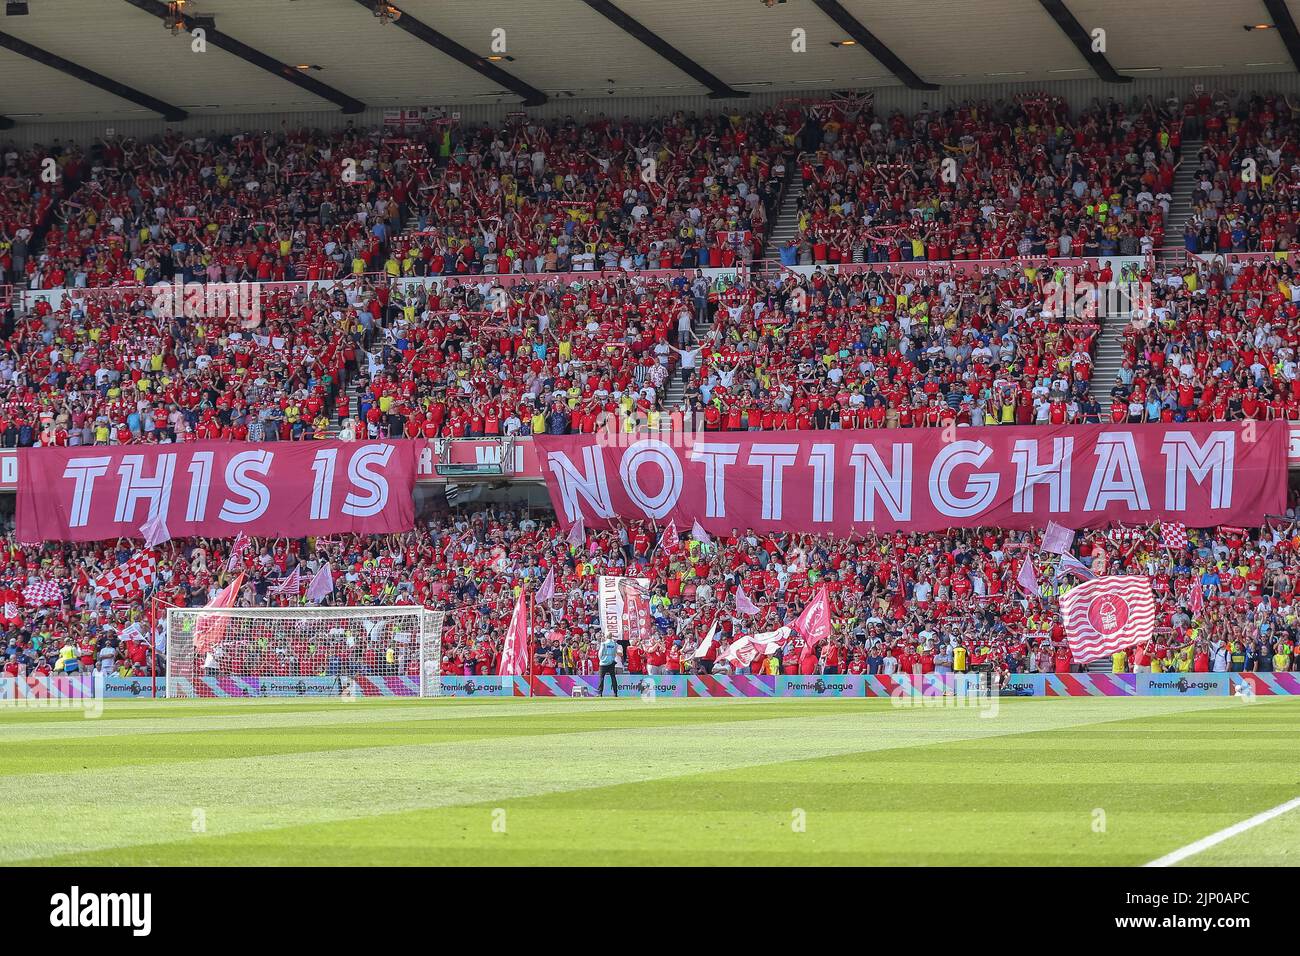 A banner displaying ‘This is Nottingham’ before kick off Stock Photo